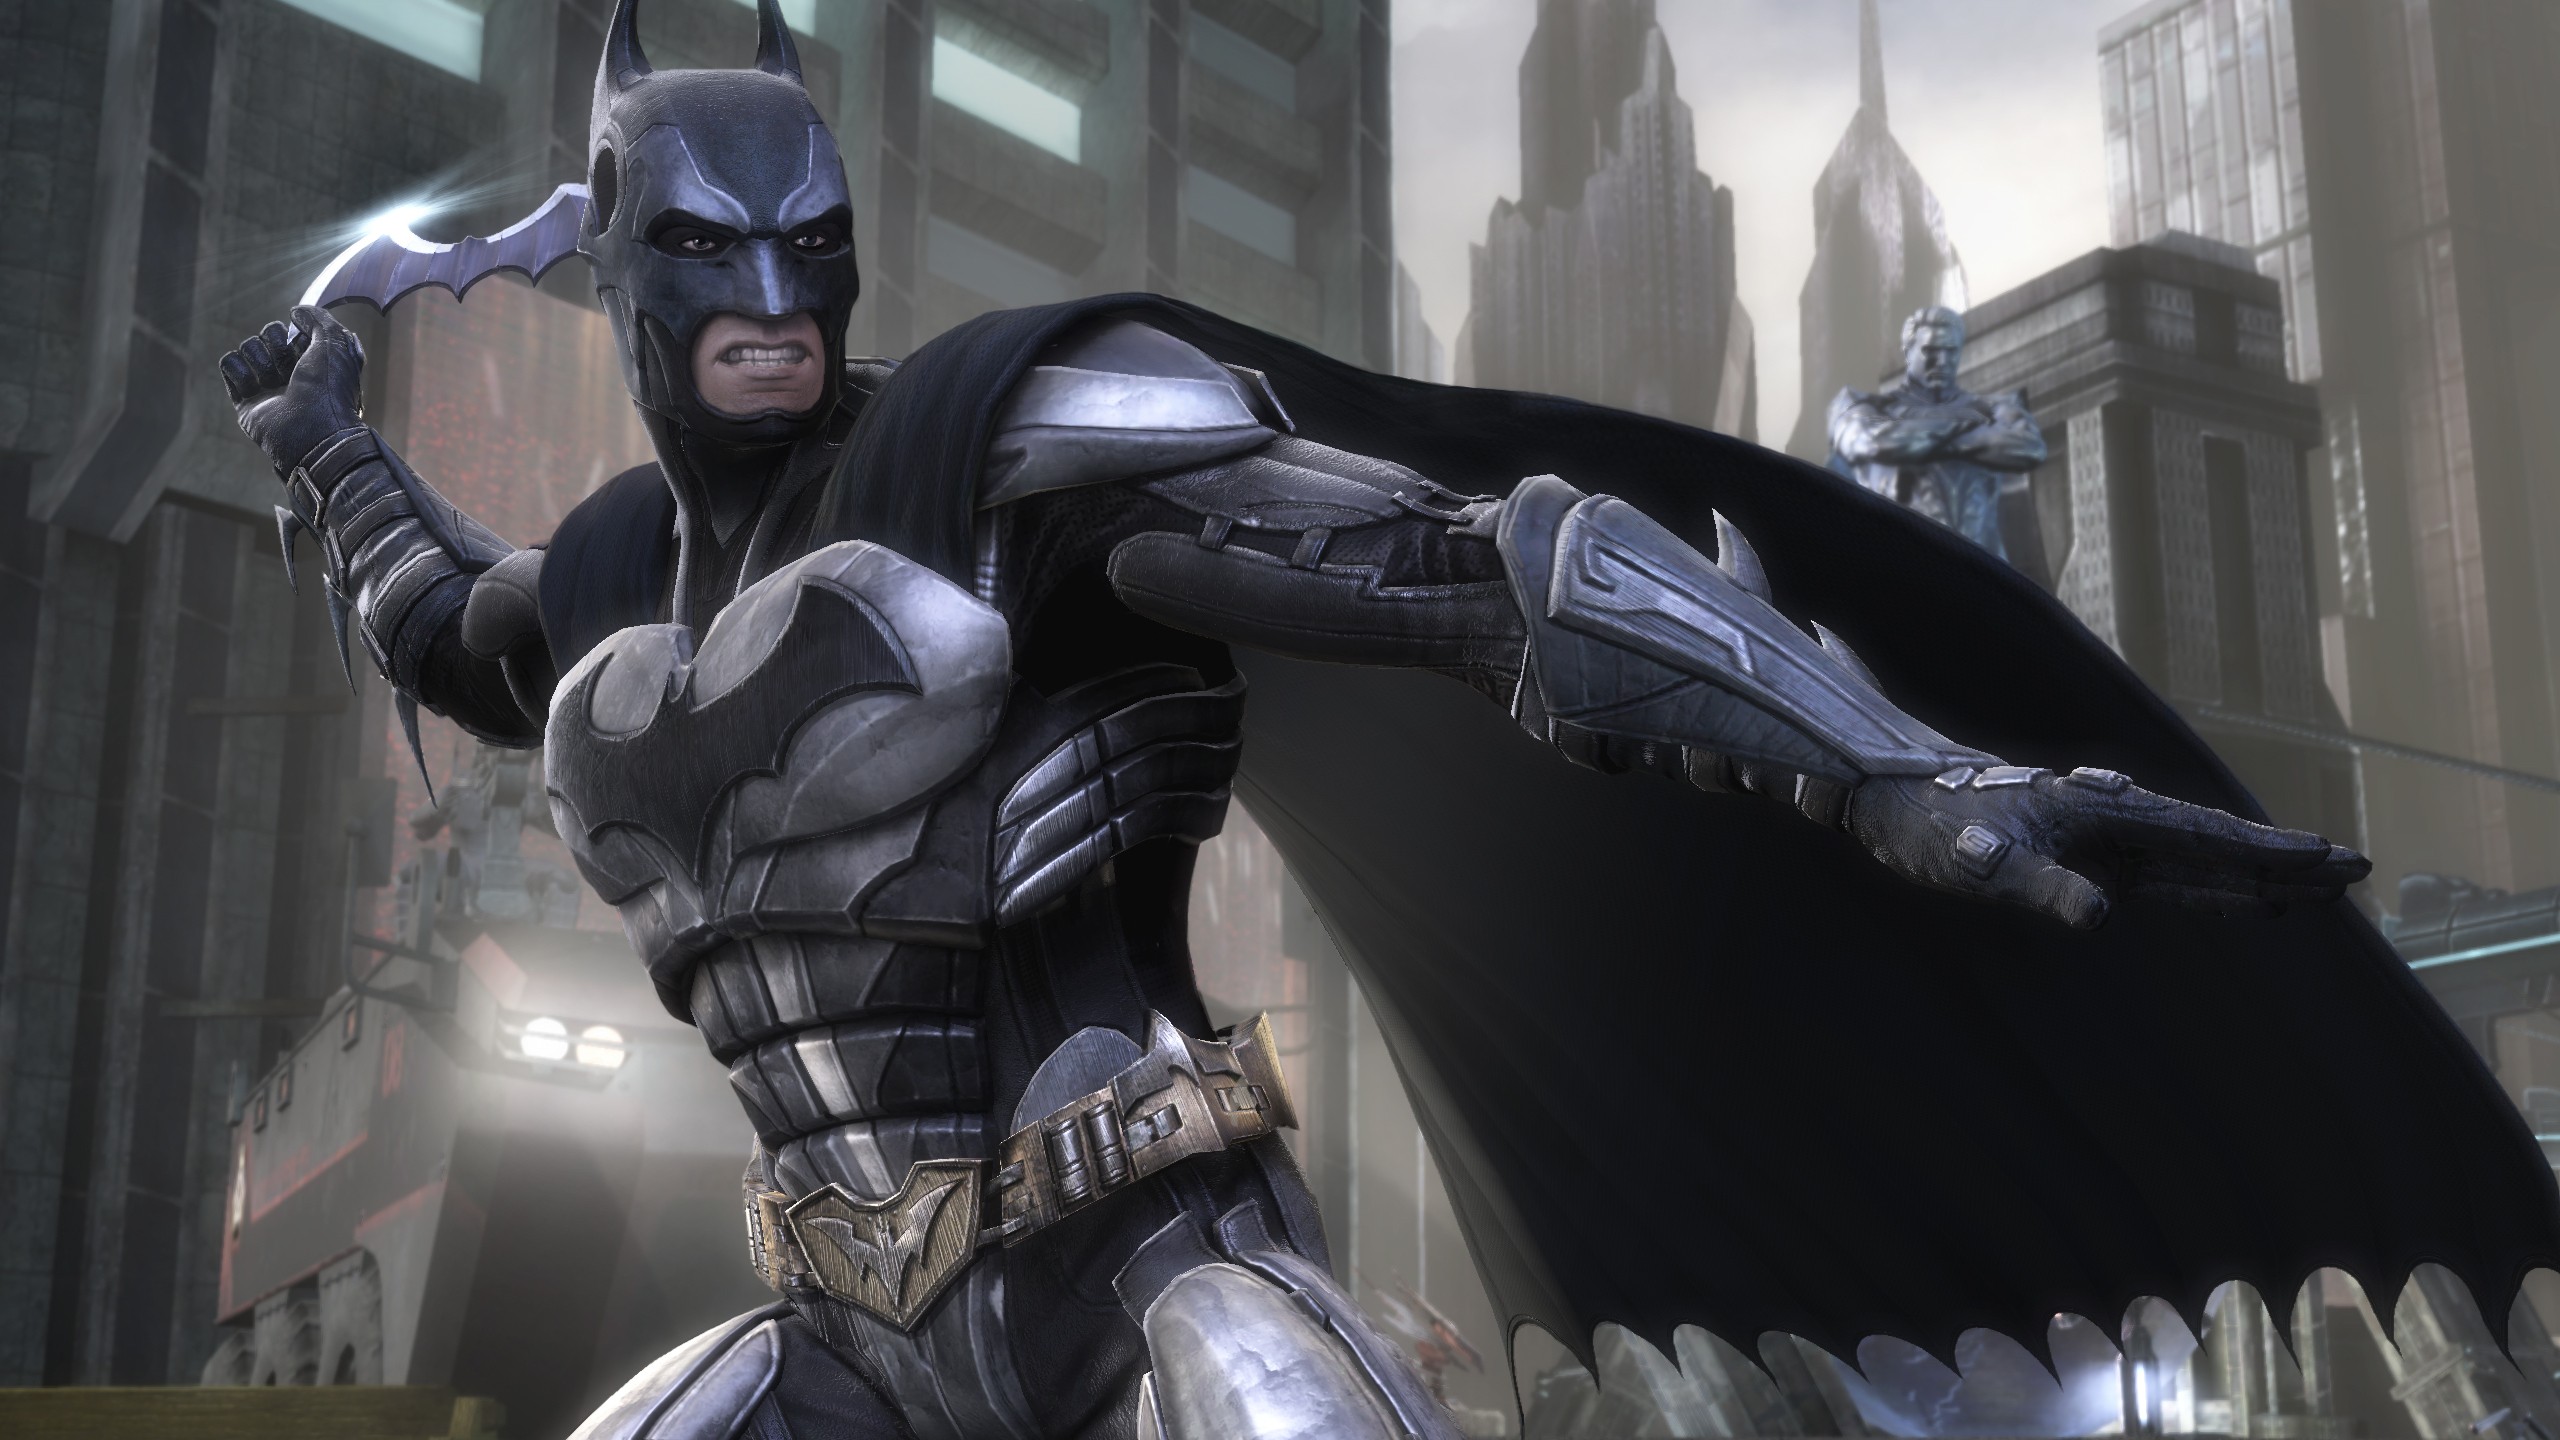 Free HD video game, injustice: gods among us, injustice